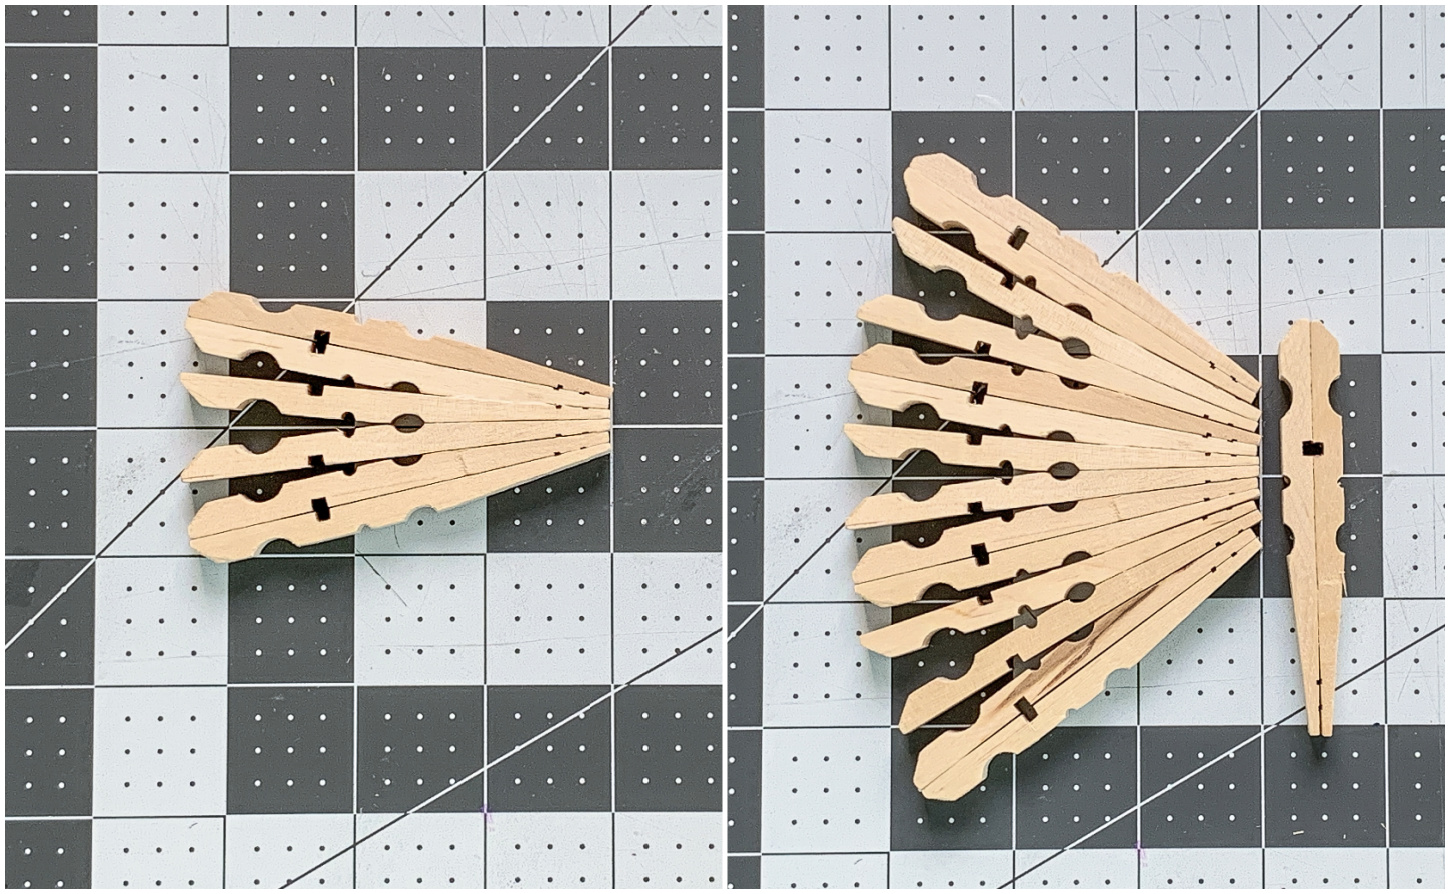 Forming a butterfly wing out of clothespins